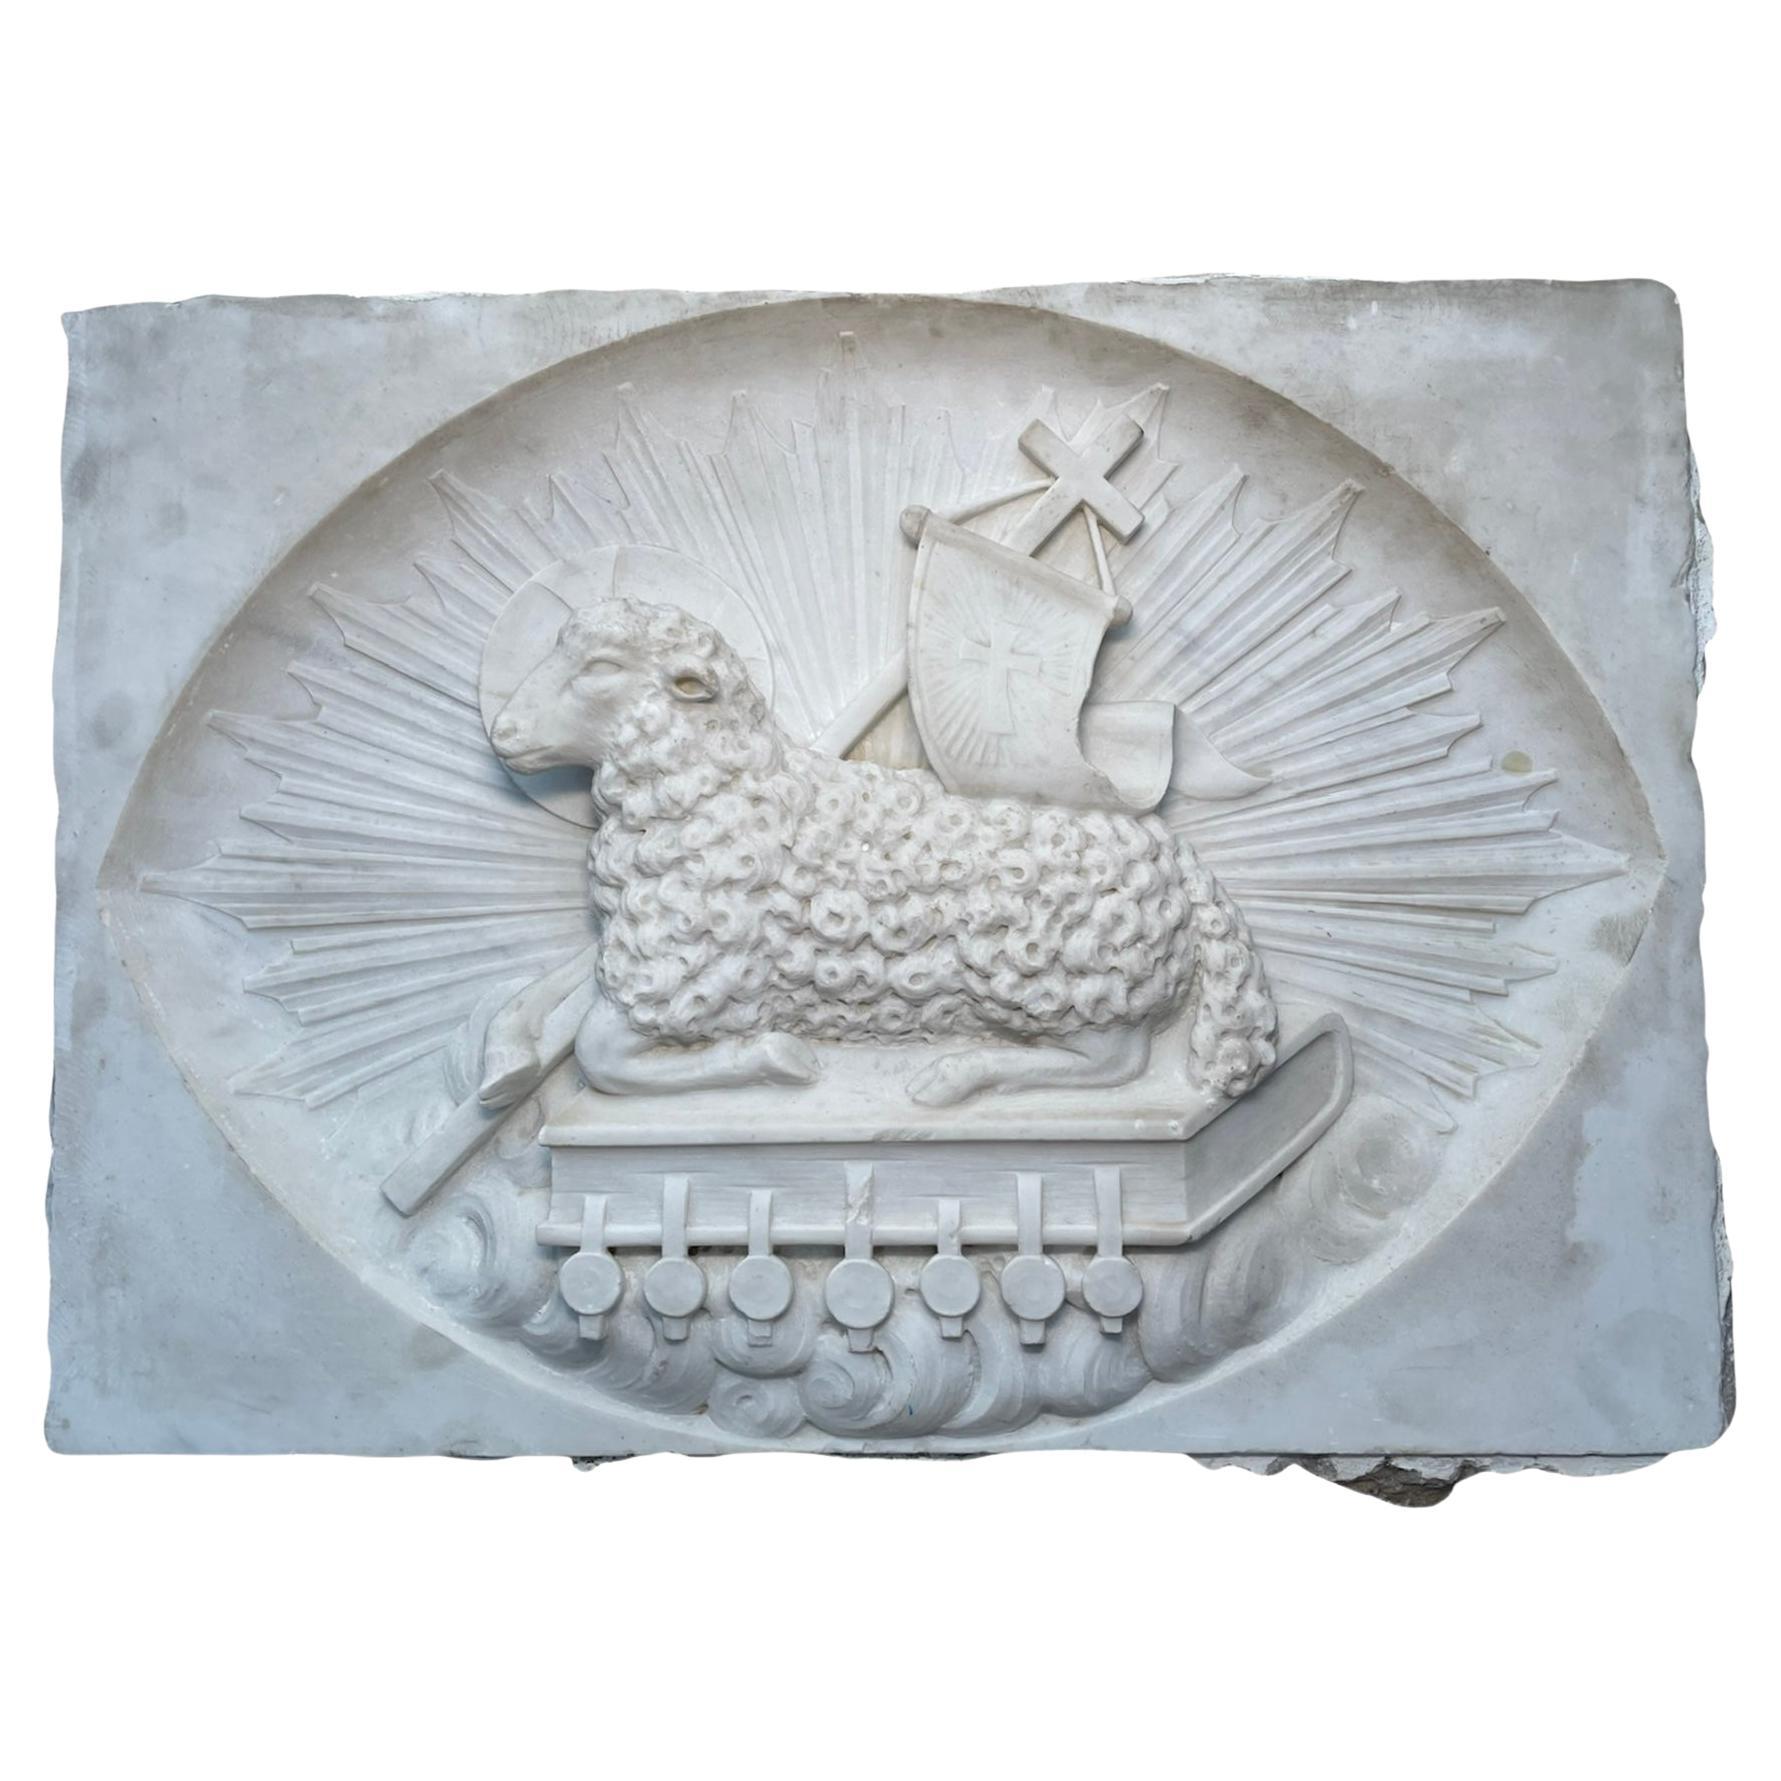 Large Heavy Rectangular Carved Marble Relief of the Agnus Dei 'Lamb of God'